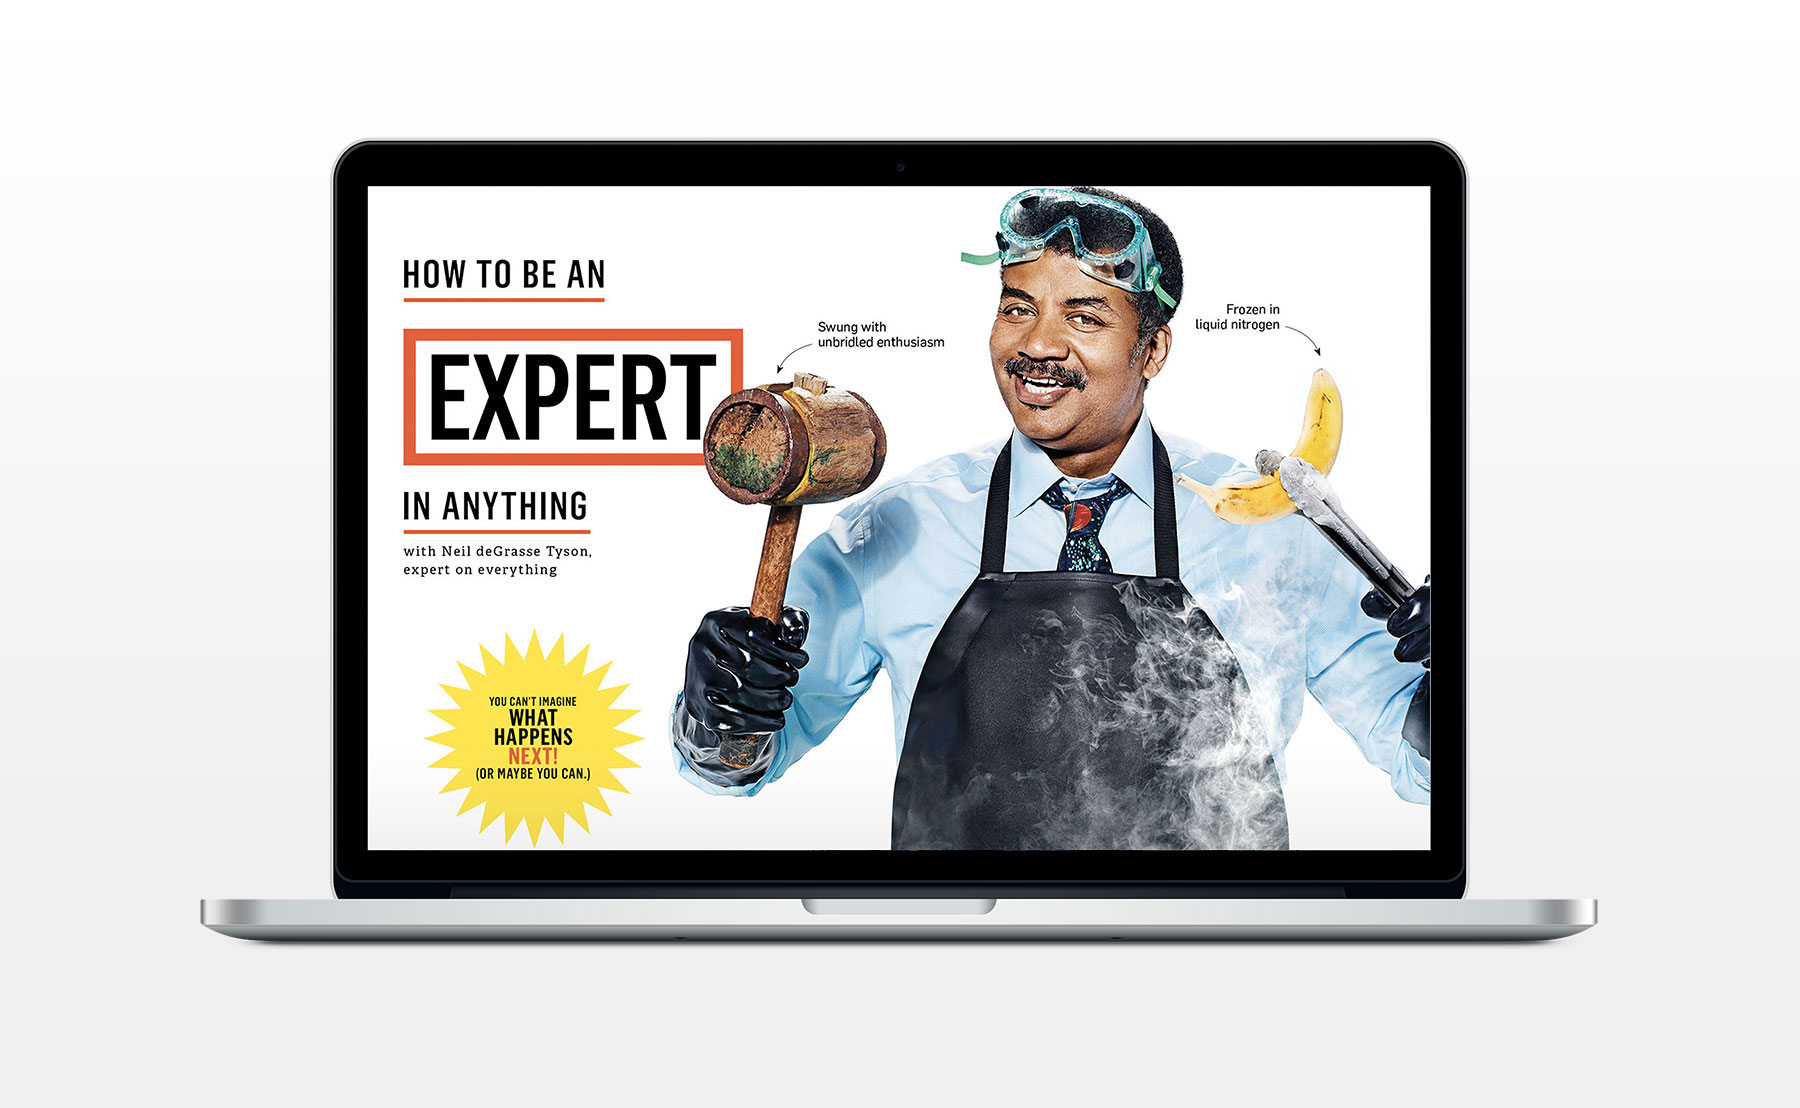 Popular Science - How to be an expert in anything